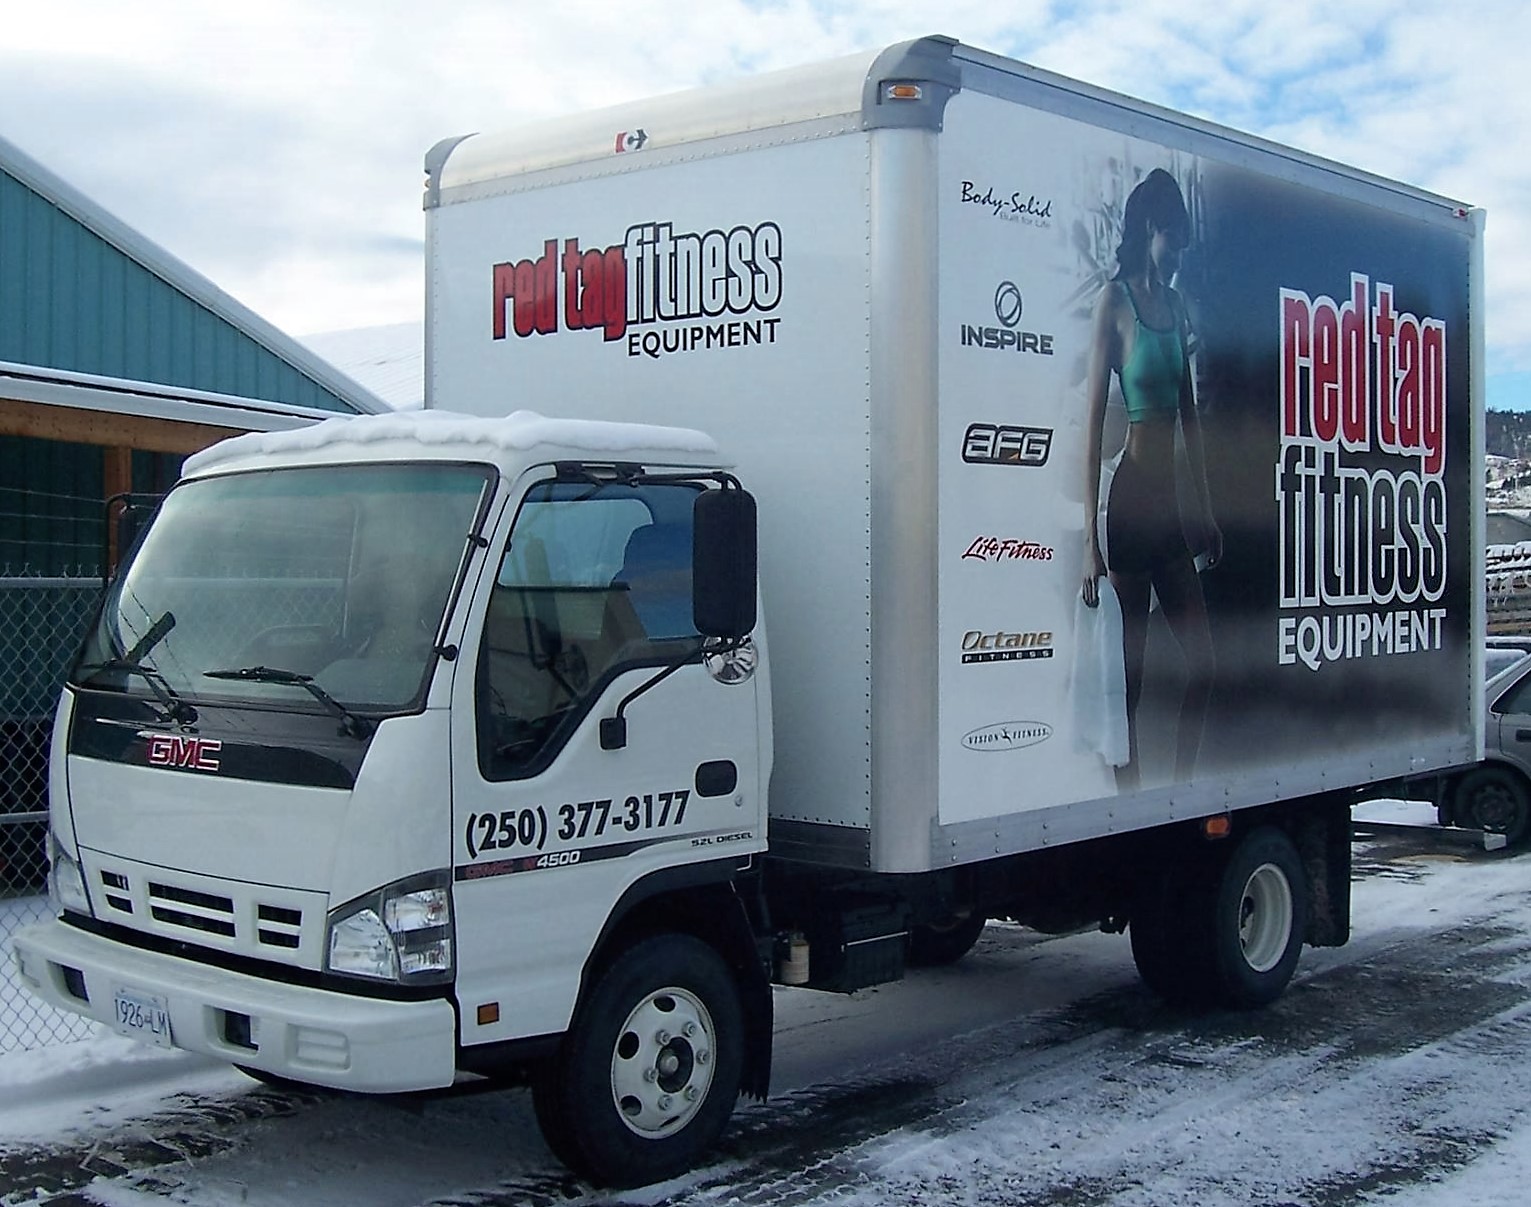 Red Tag Fitness Delivery Truck